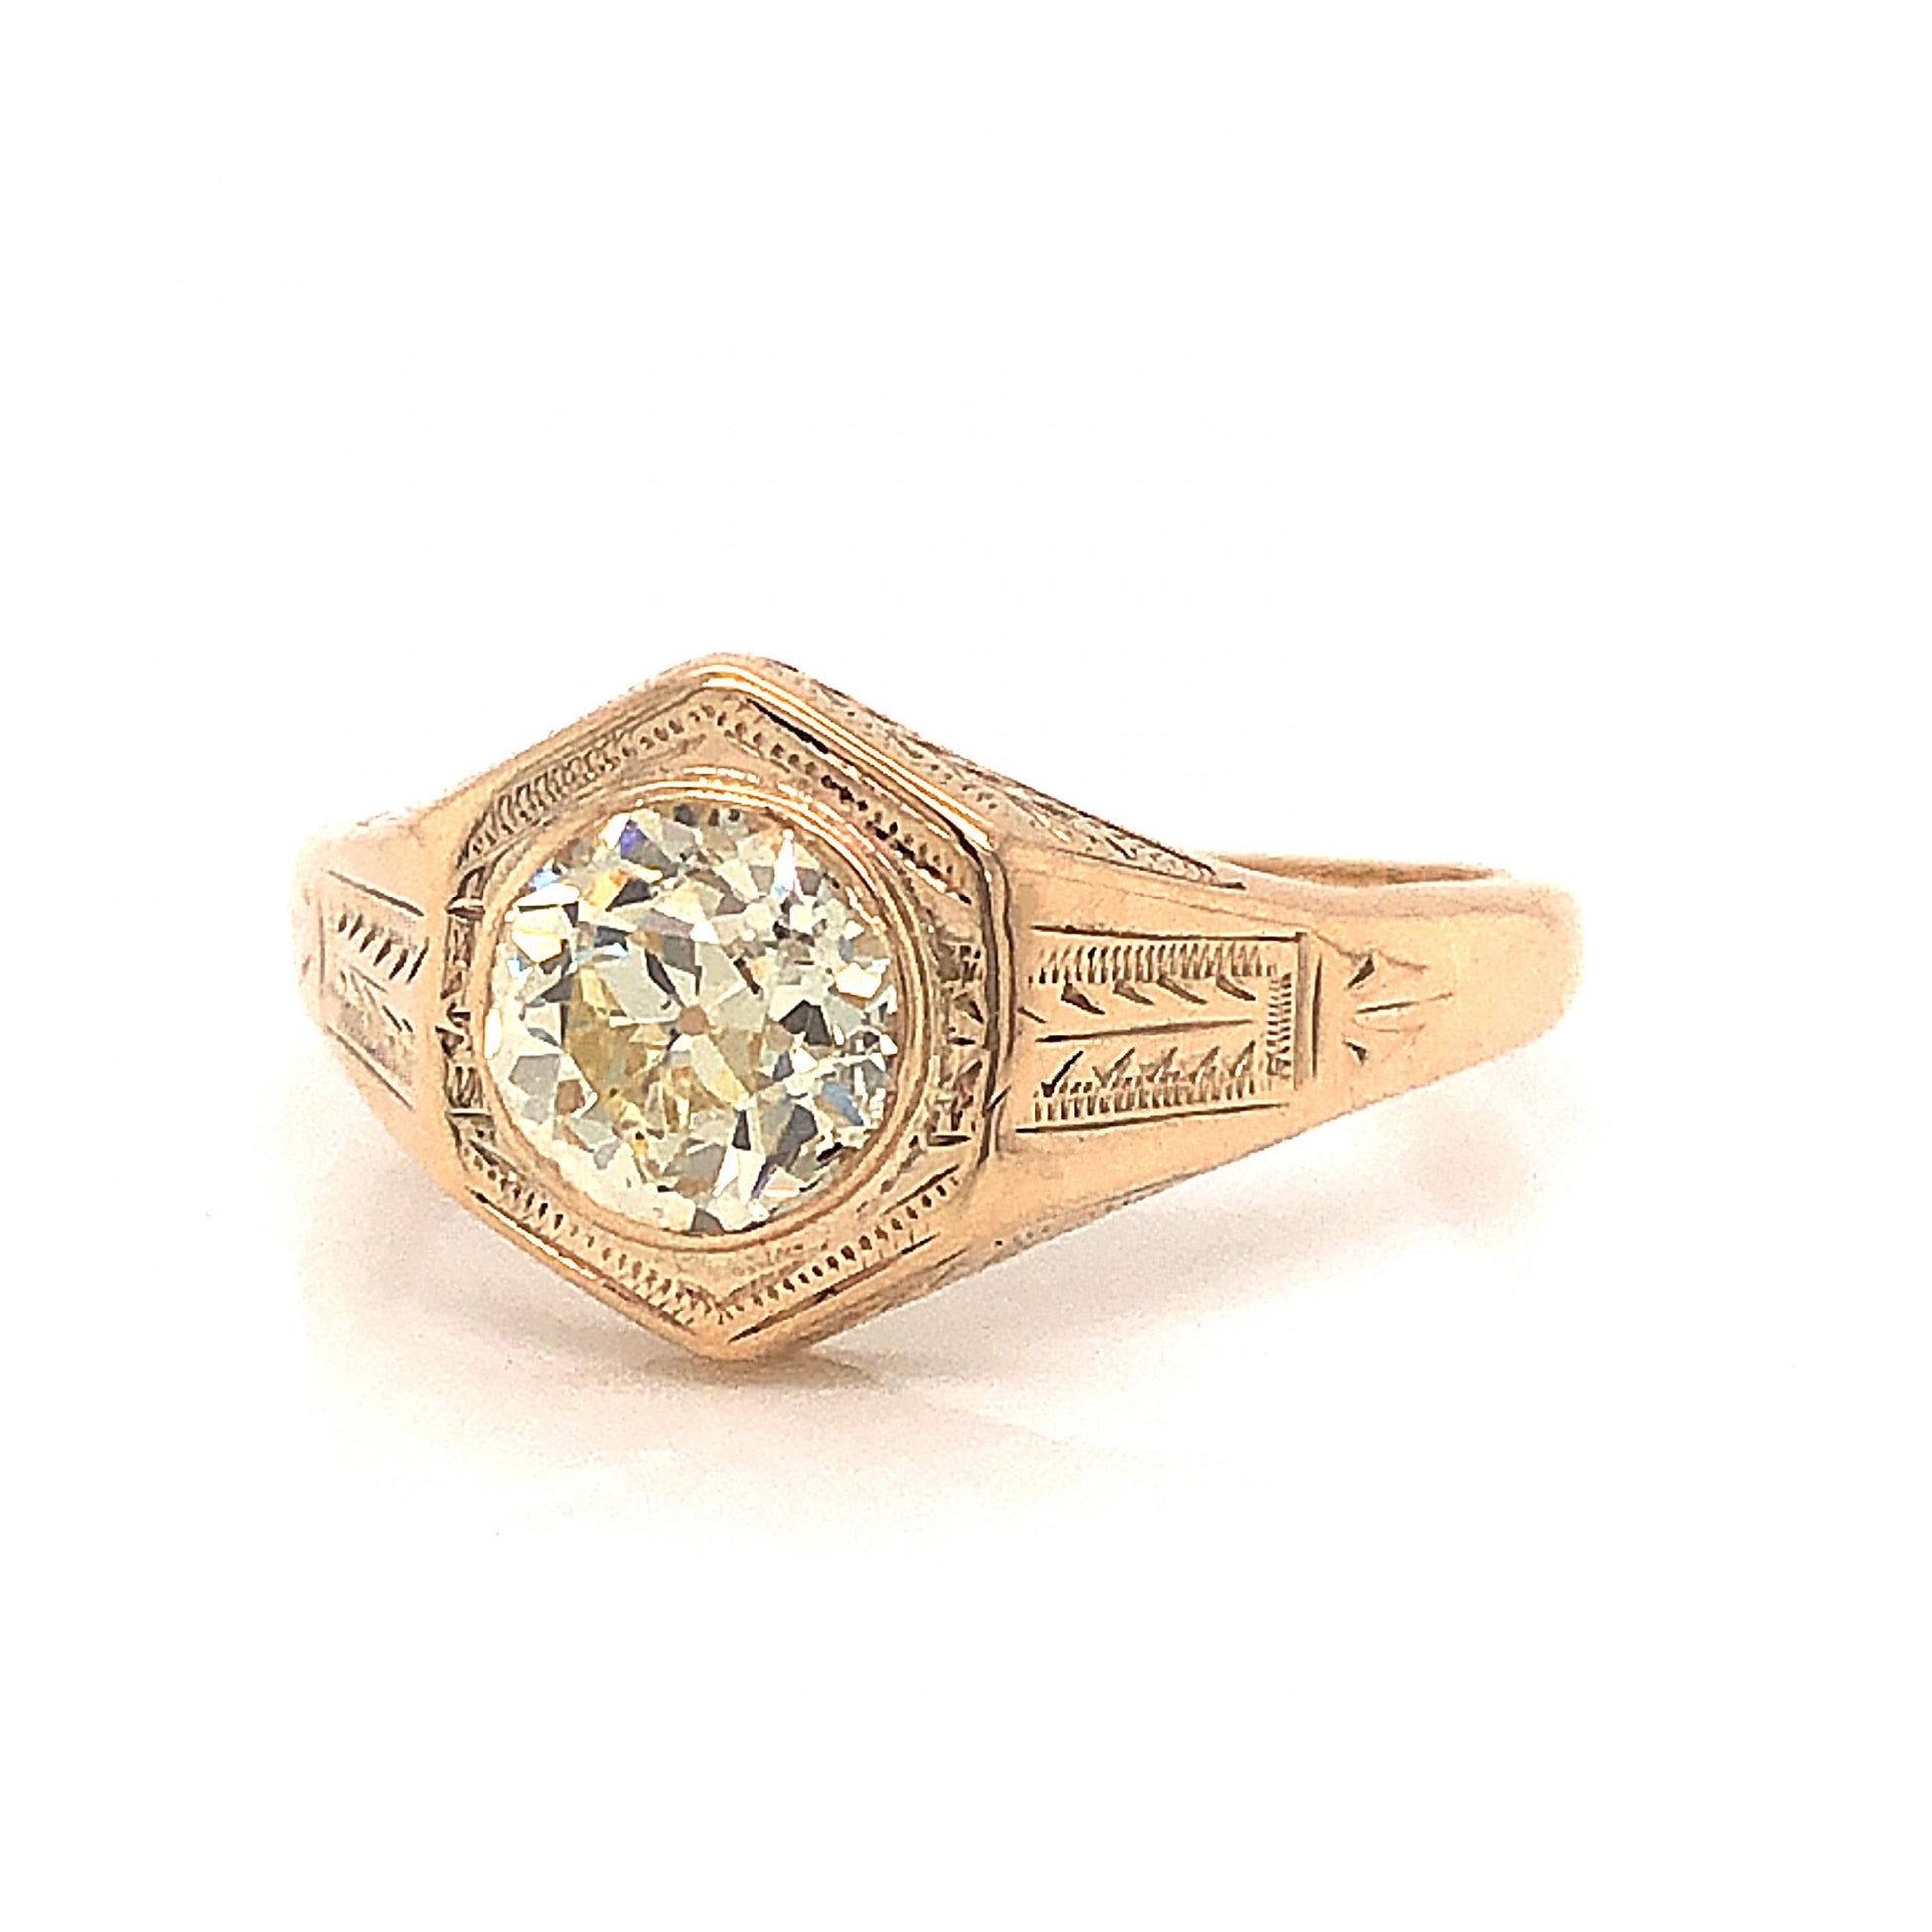 Engraved Victorian Diamond Engagement Ring in 10k Yellow GoldComposition: 10 Karat Yellow Gold Ring Size: 6.5 Total Diamond Weight: .87ct Total Gram Weight: 1.6 g Inscription: 10k
      